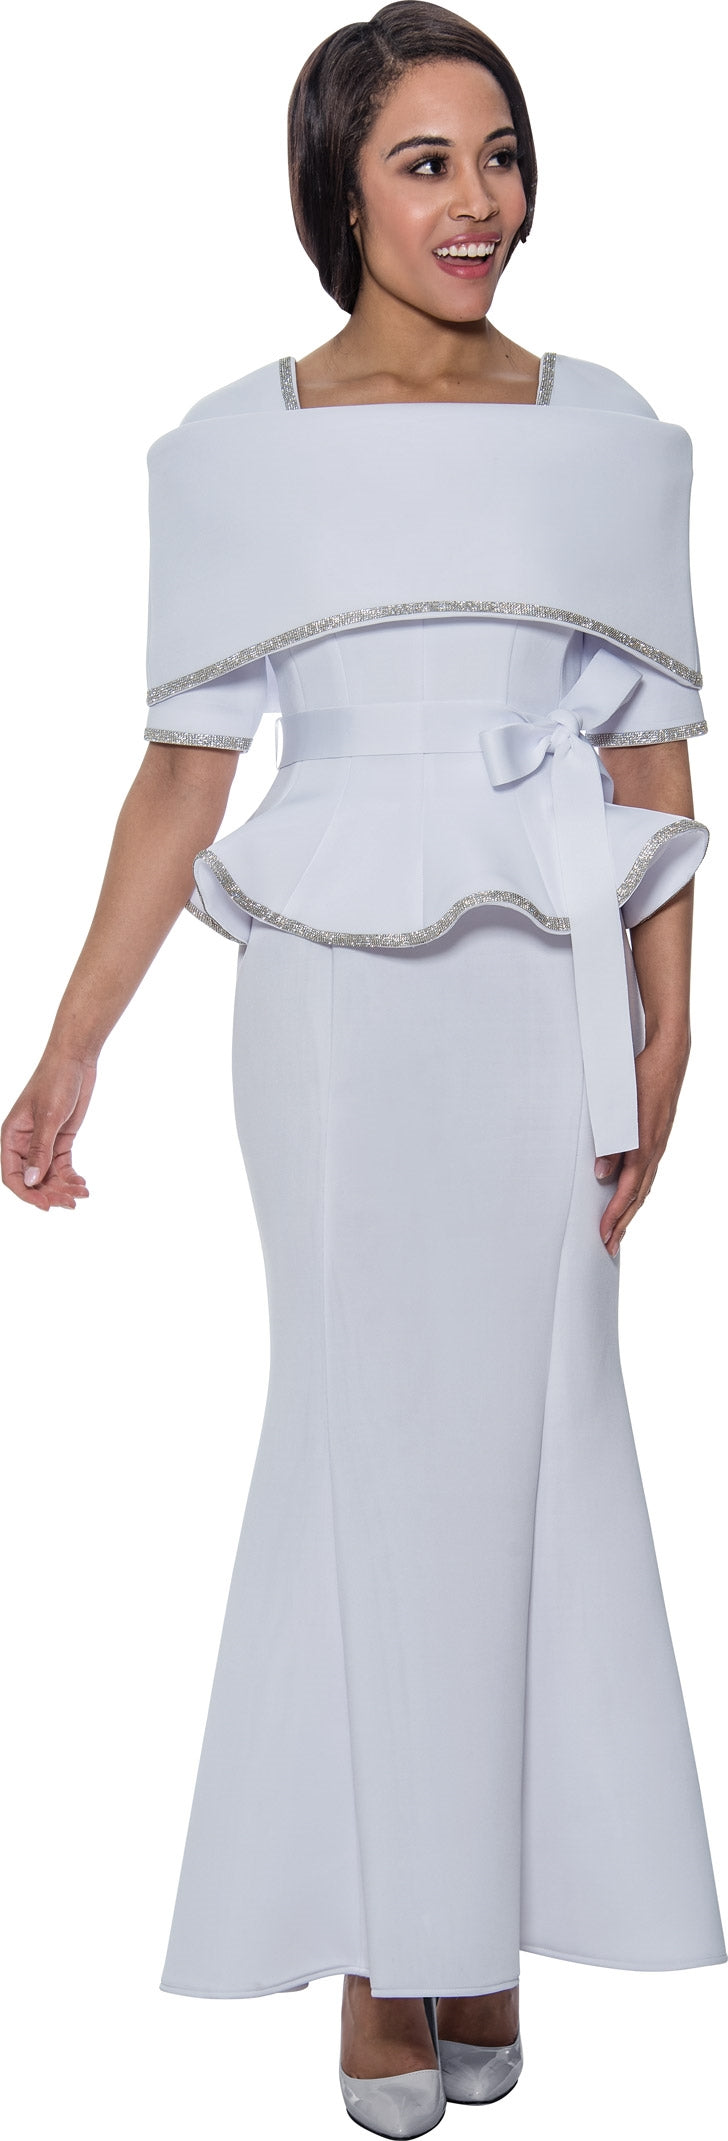 Stellar Looks Skirt Suit 1692-White - Church Suits For Less